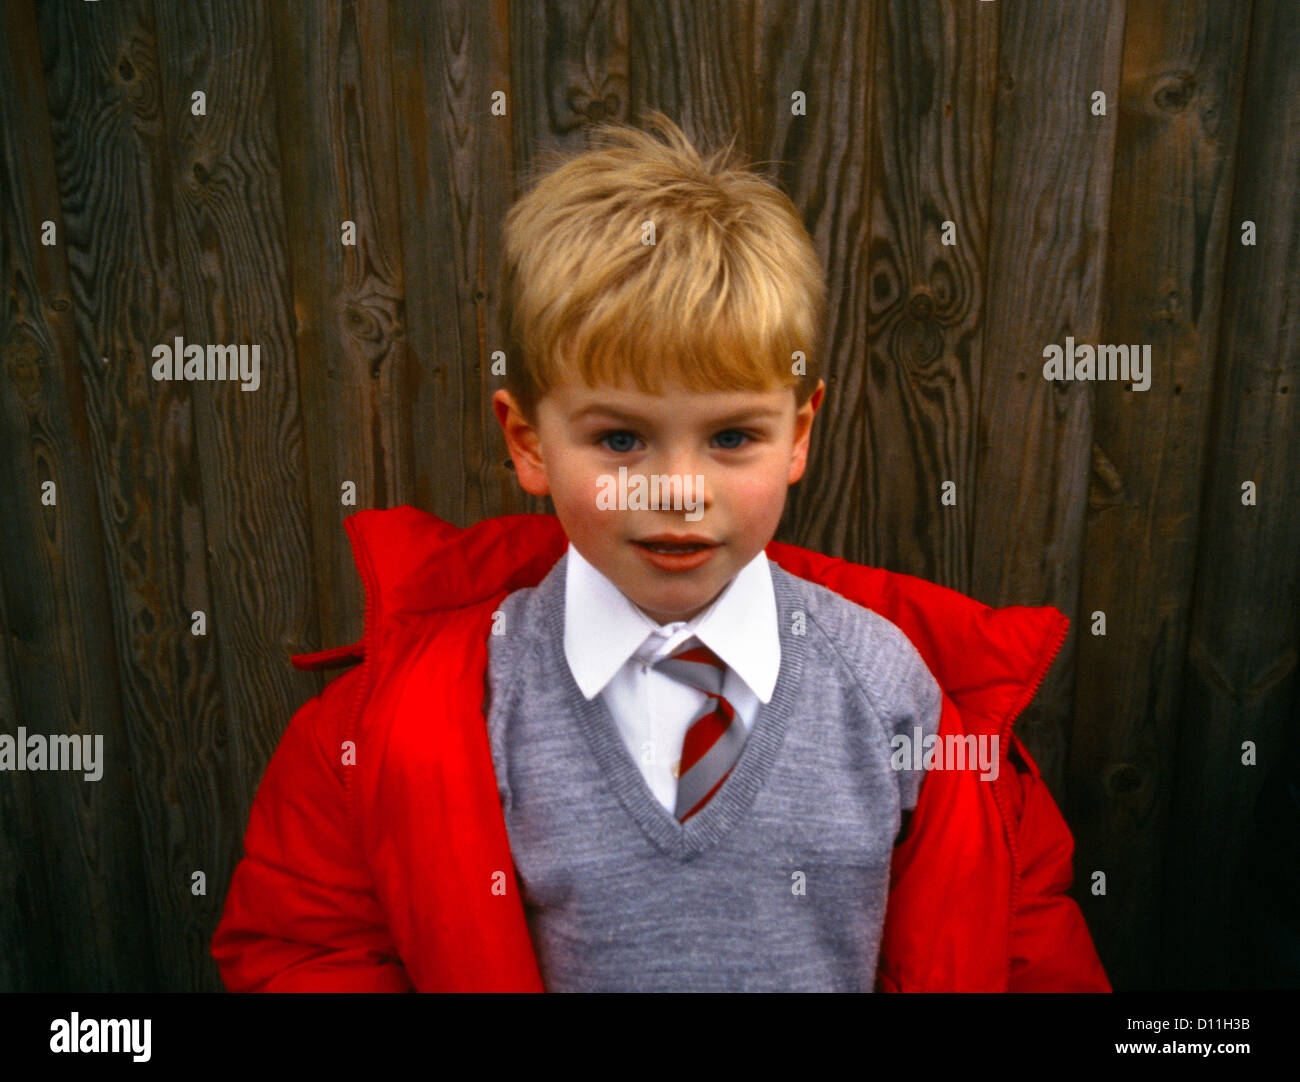 Portrait of Boy 6 Years wearing School Uniform and Red coat Stock Photo